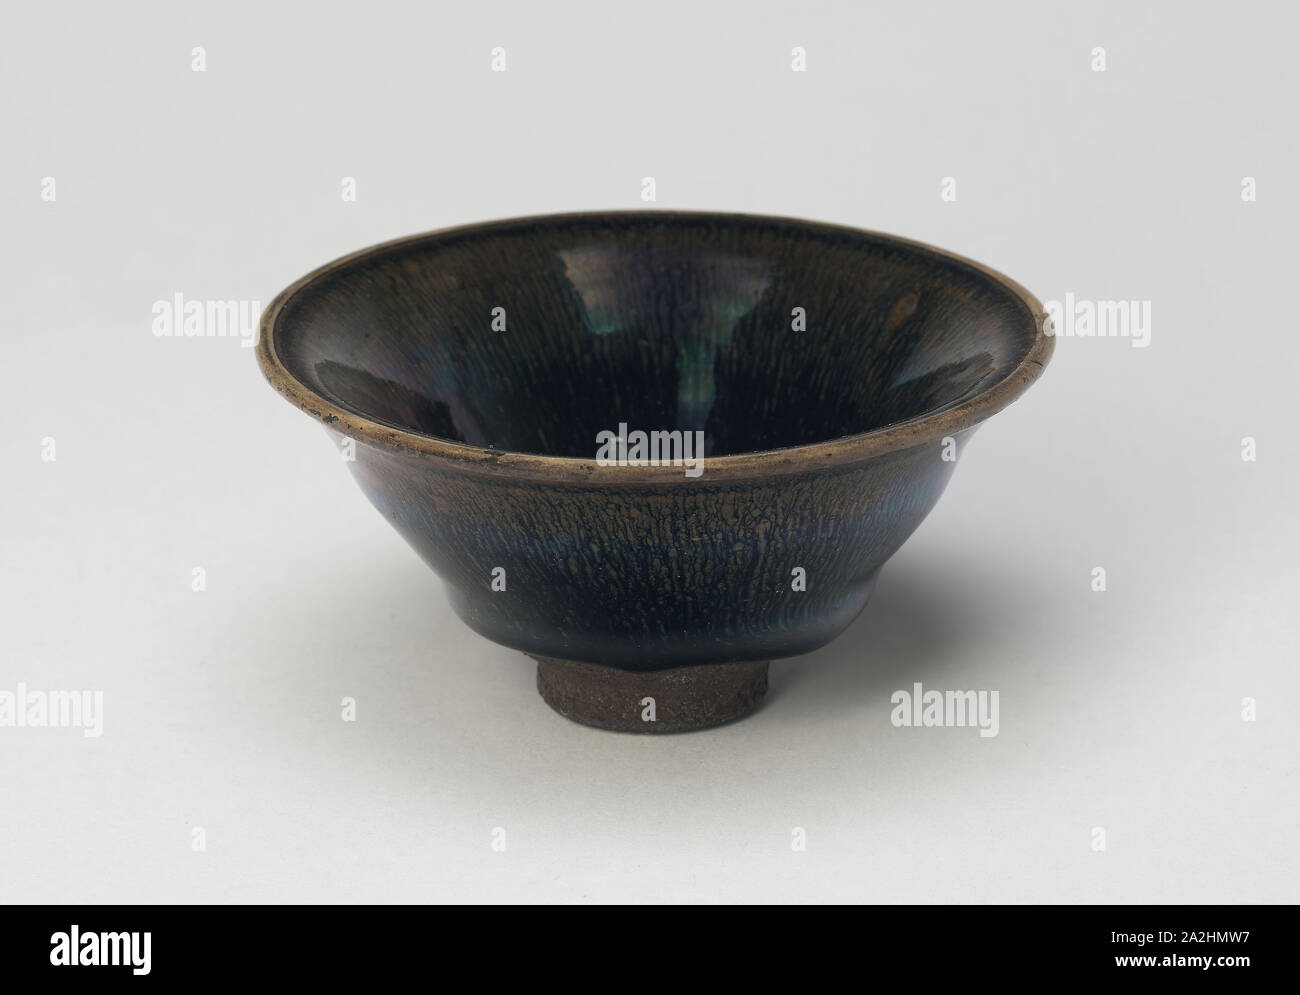 Teabowl with Everted Mouth Rim, Song dynasty (960–1279), 12th century, China, Fujian province, China, Jian ware, dark-gray stoneware with dark-brown glaze and hare’s fur markings in iron oxide, H. 5.3 cm (2 1/16 in.), diam. 10.9 cm (4 5/16 in Stock Photo